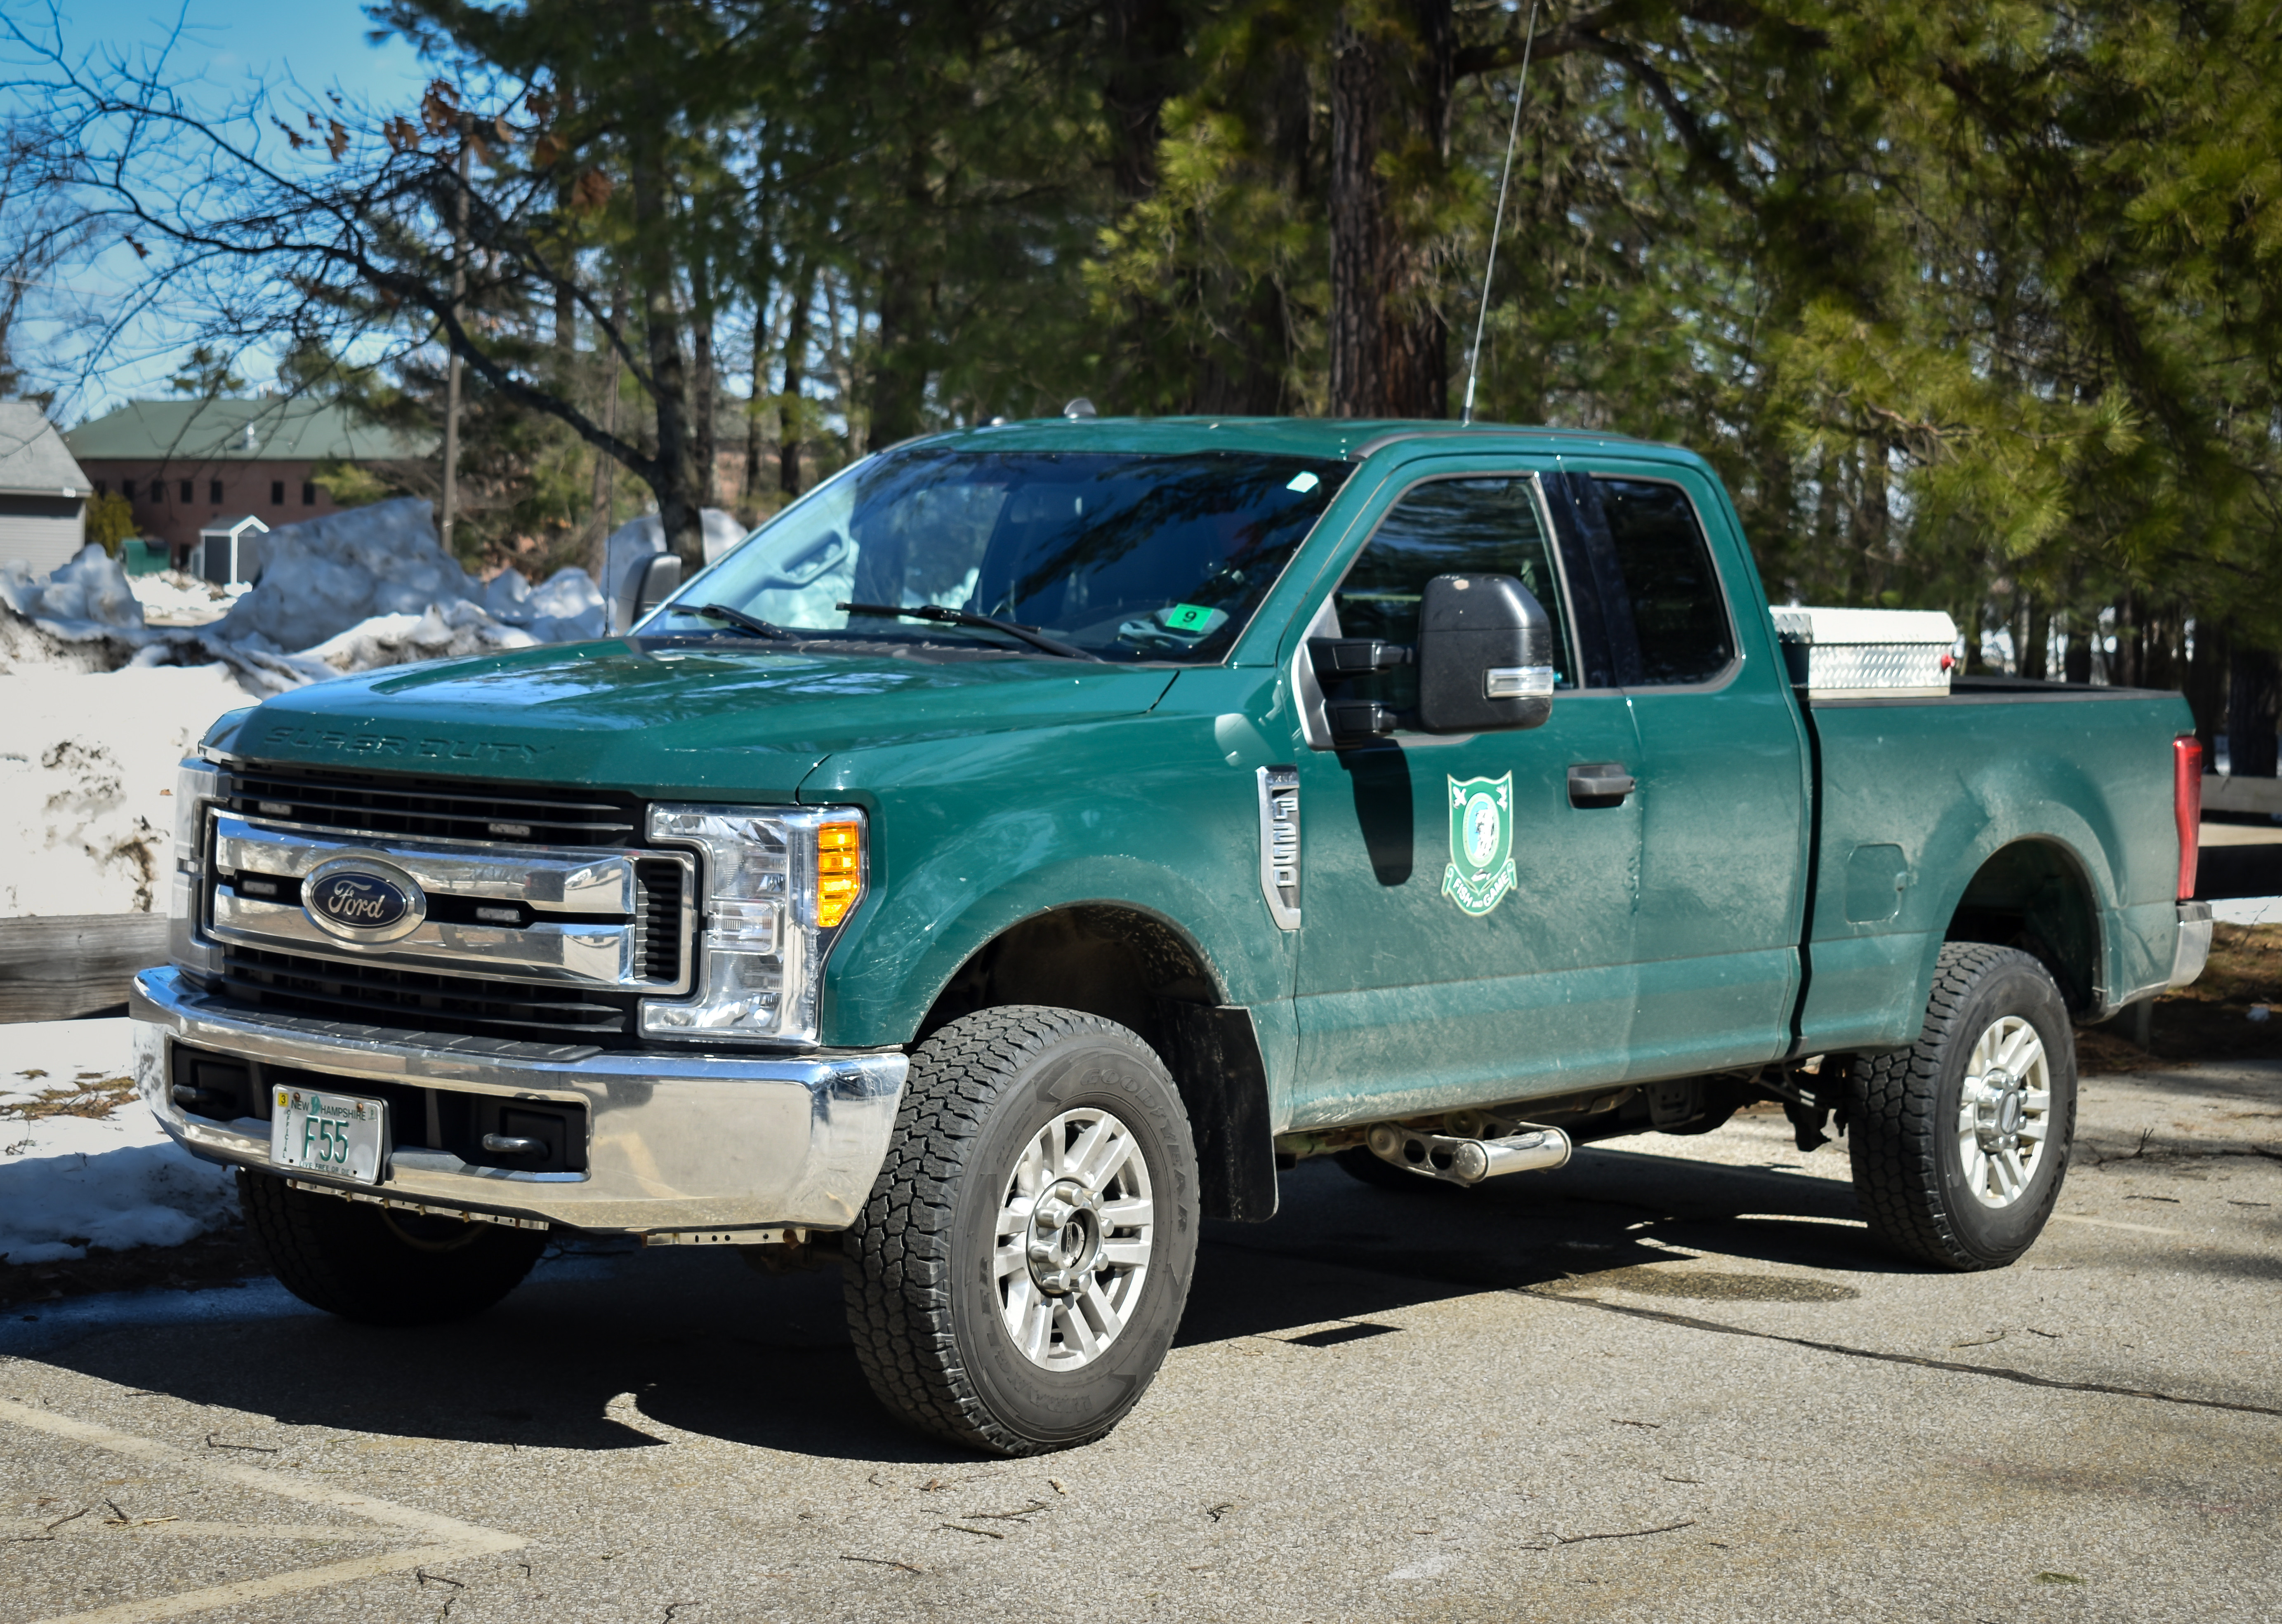 A photo  of New Hampshire Fish and Game
            Cruiser 55, a 2017-2019 Ford F-250 SuperCab             taken by Luke Tougas